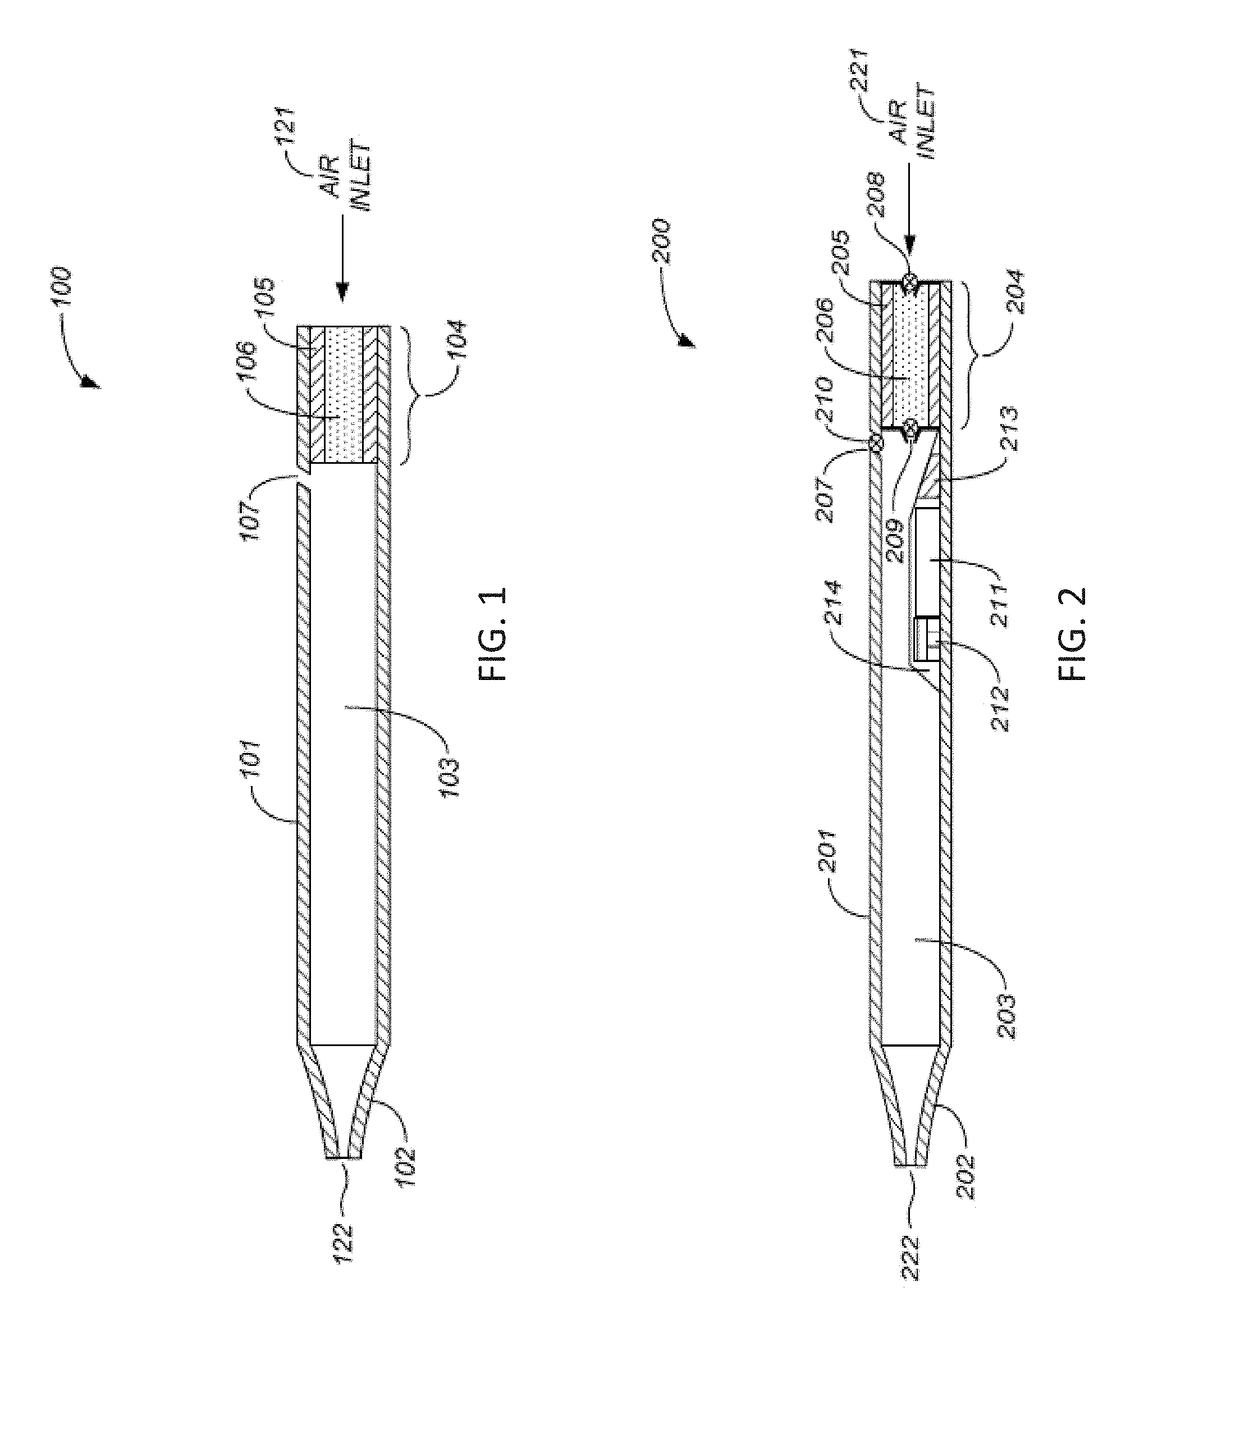 Cartridge for use with a vaporizer device